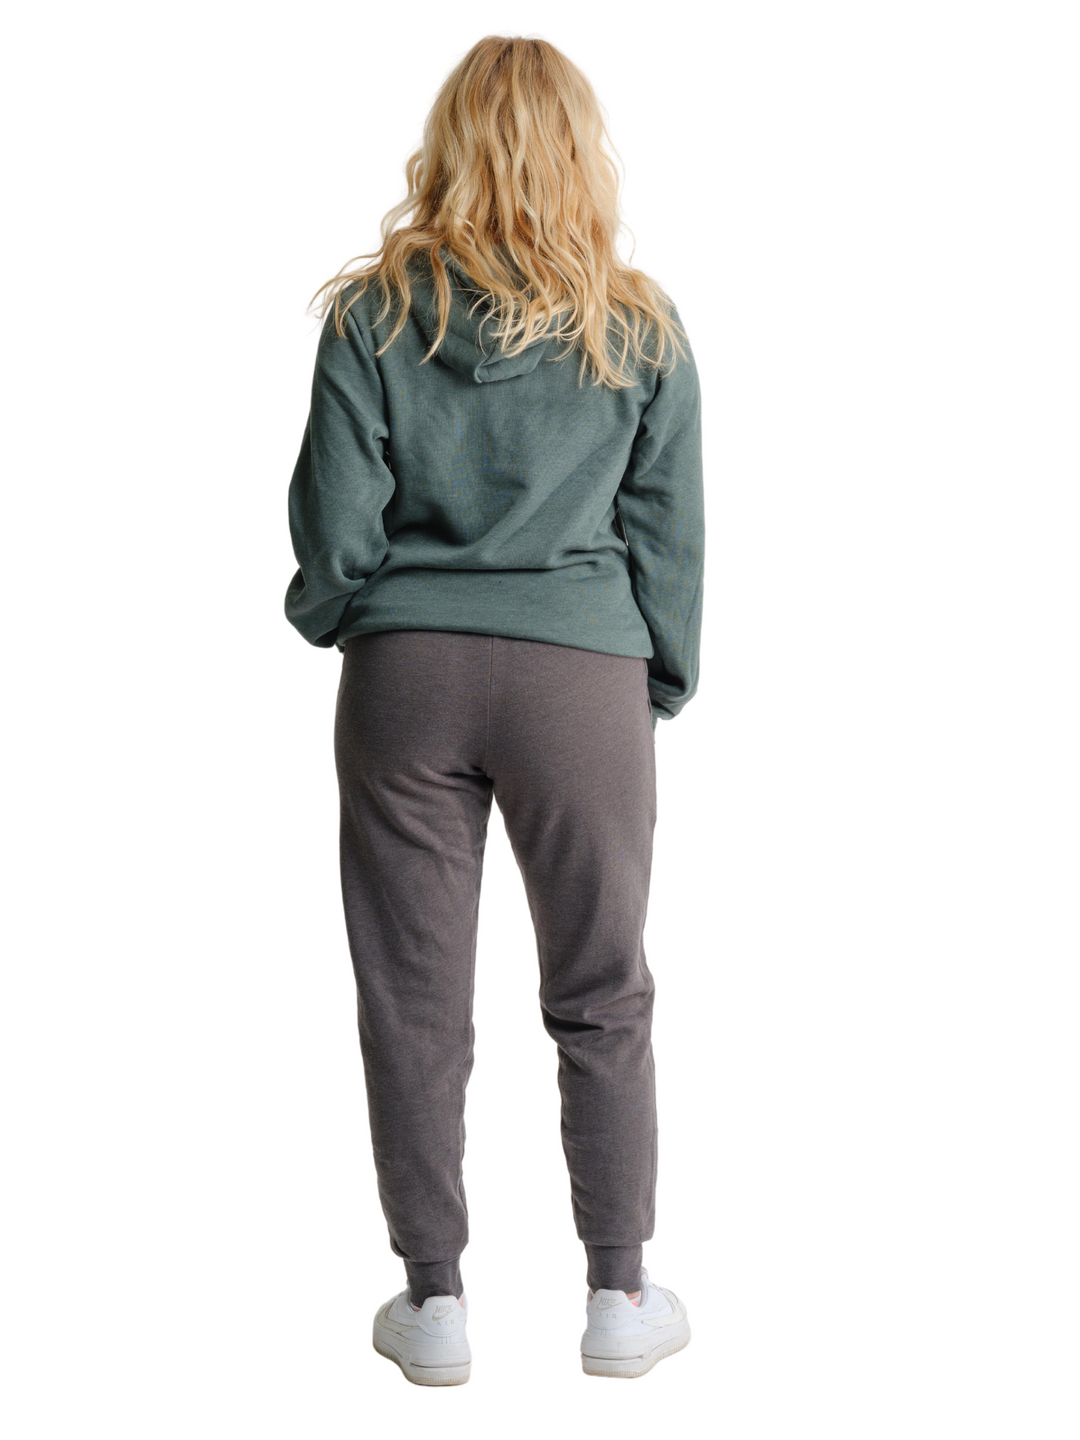 MSU Michigan State Spartans Gruff Sparty Womens Jogging pants sweatpants Joggers Back